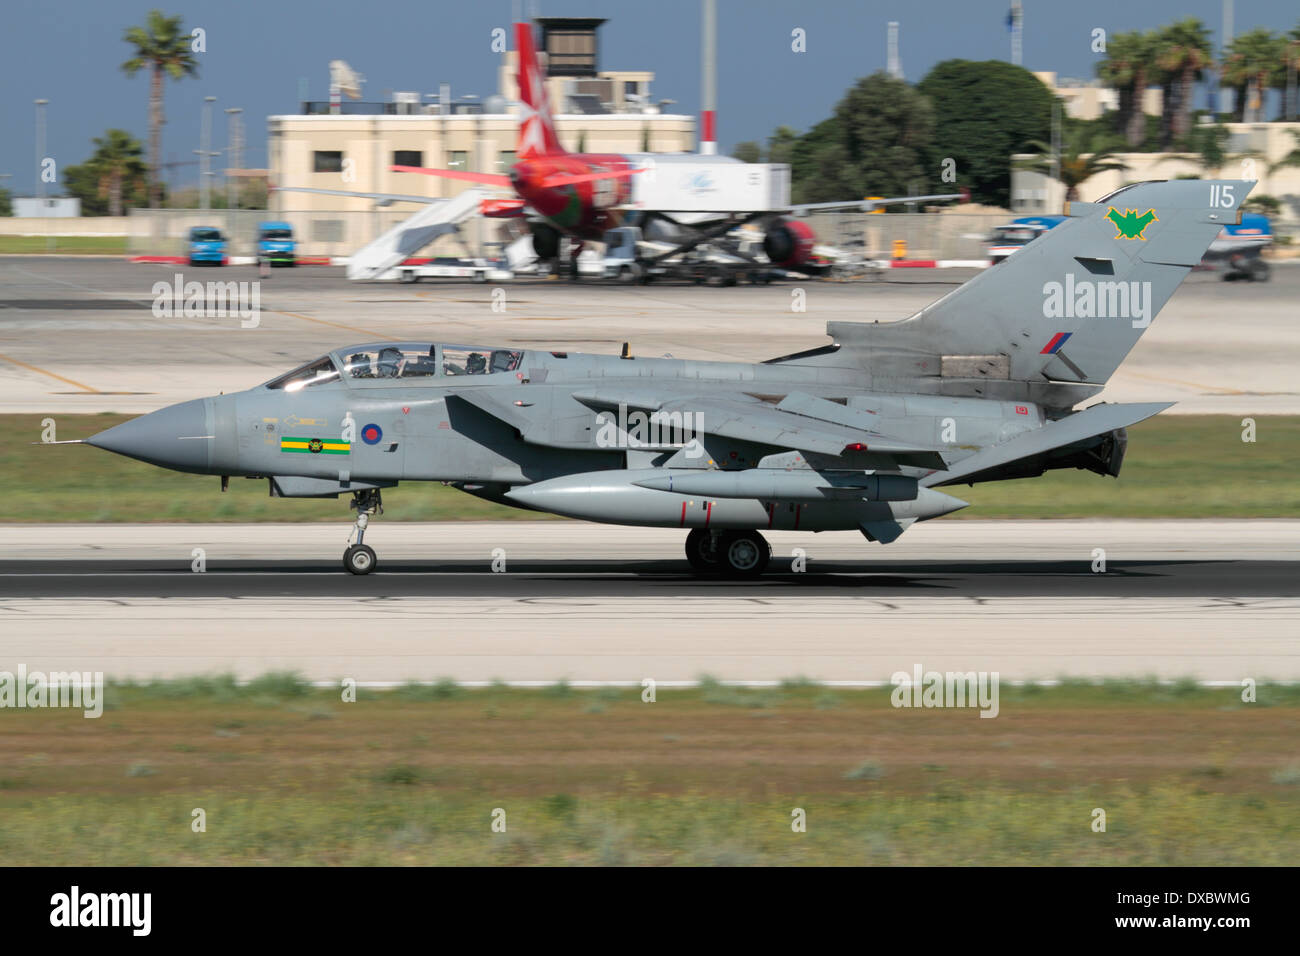 Royal Air Force Panavia Tornado GR4 tactical bomber on arrival in Malta Stock Photo